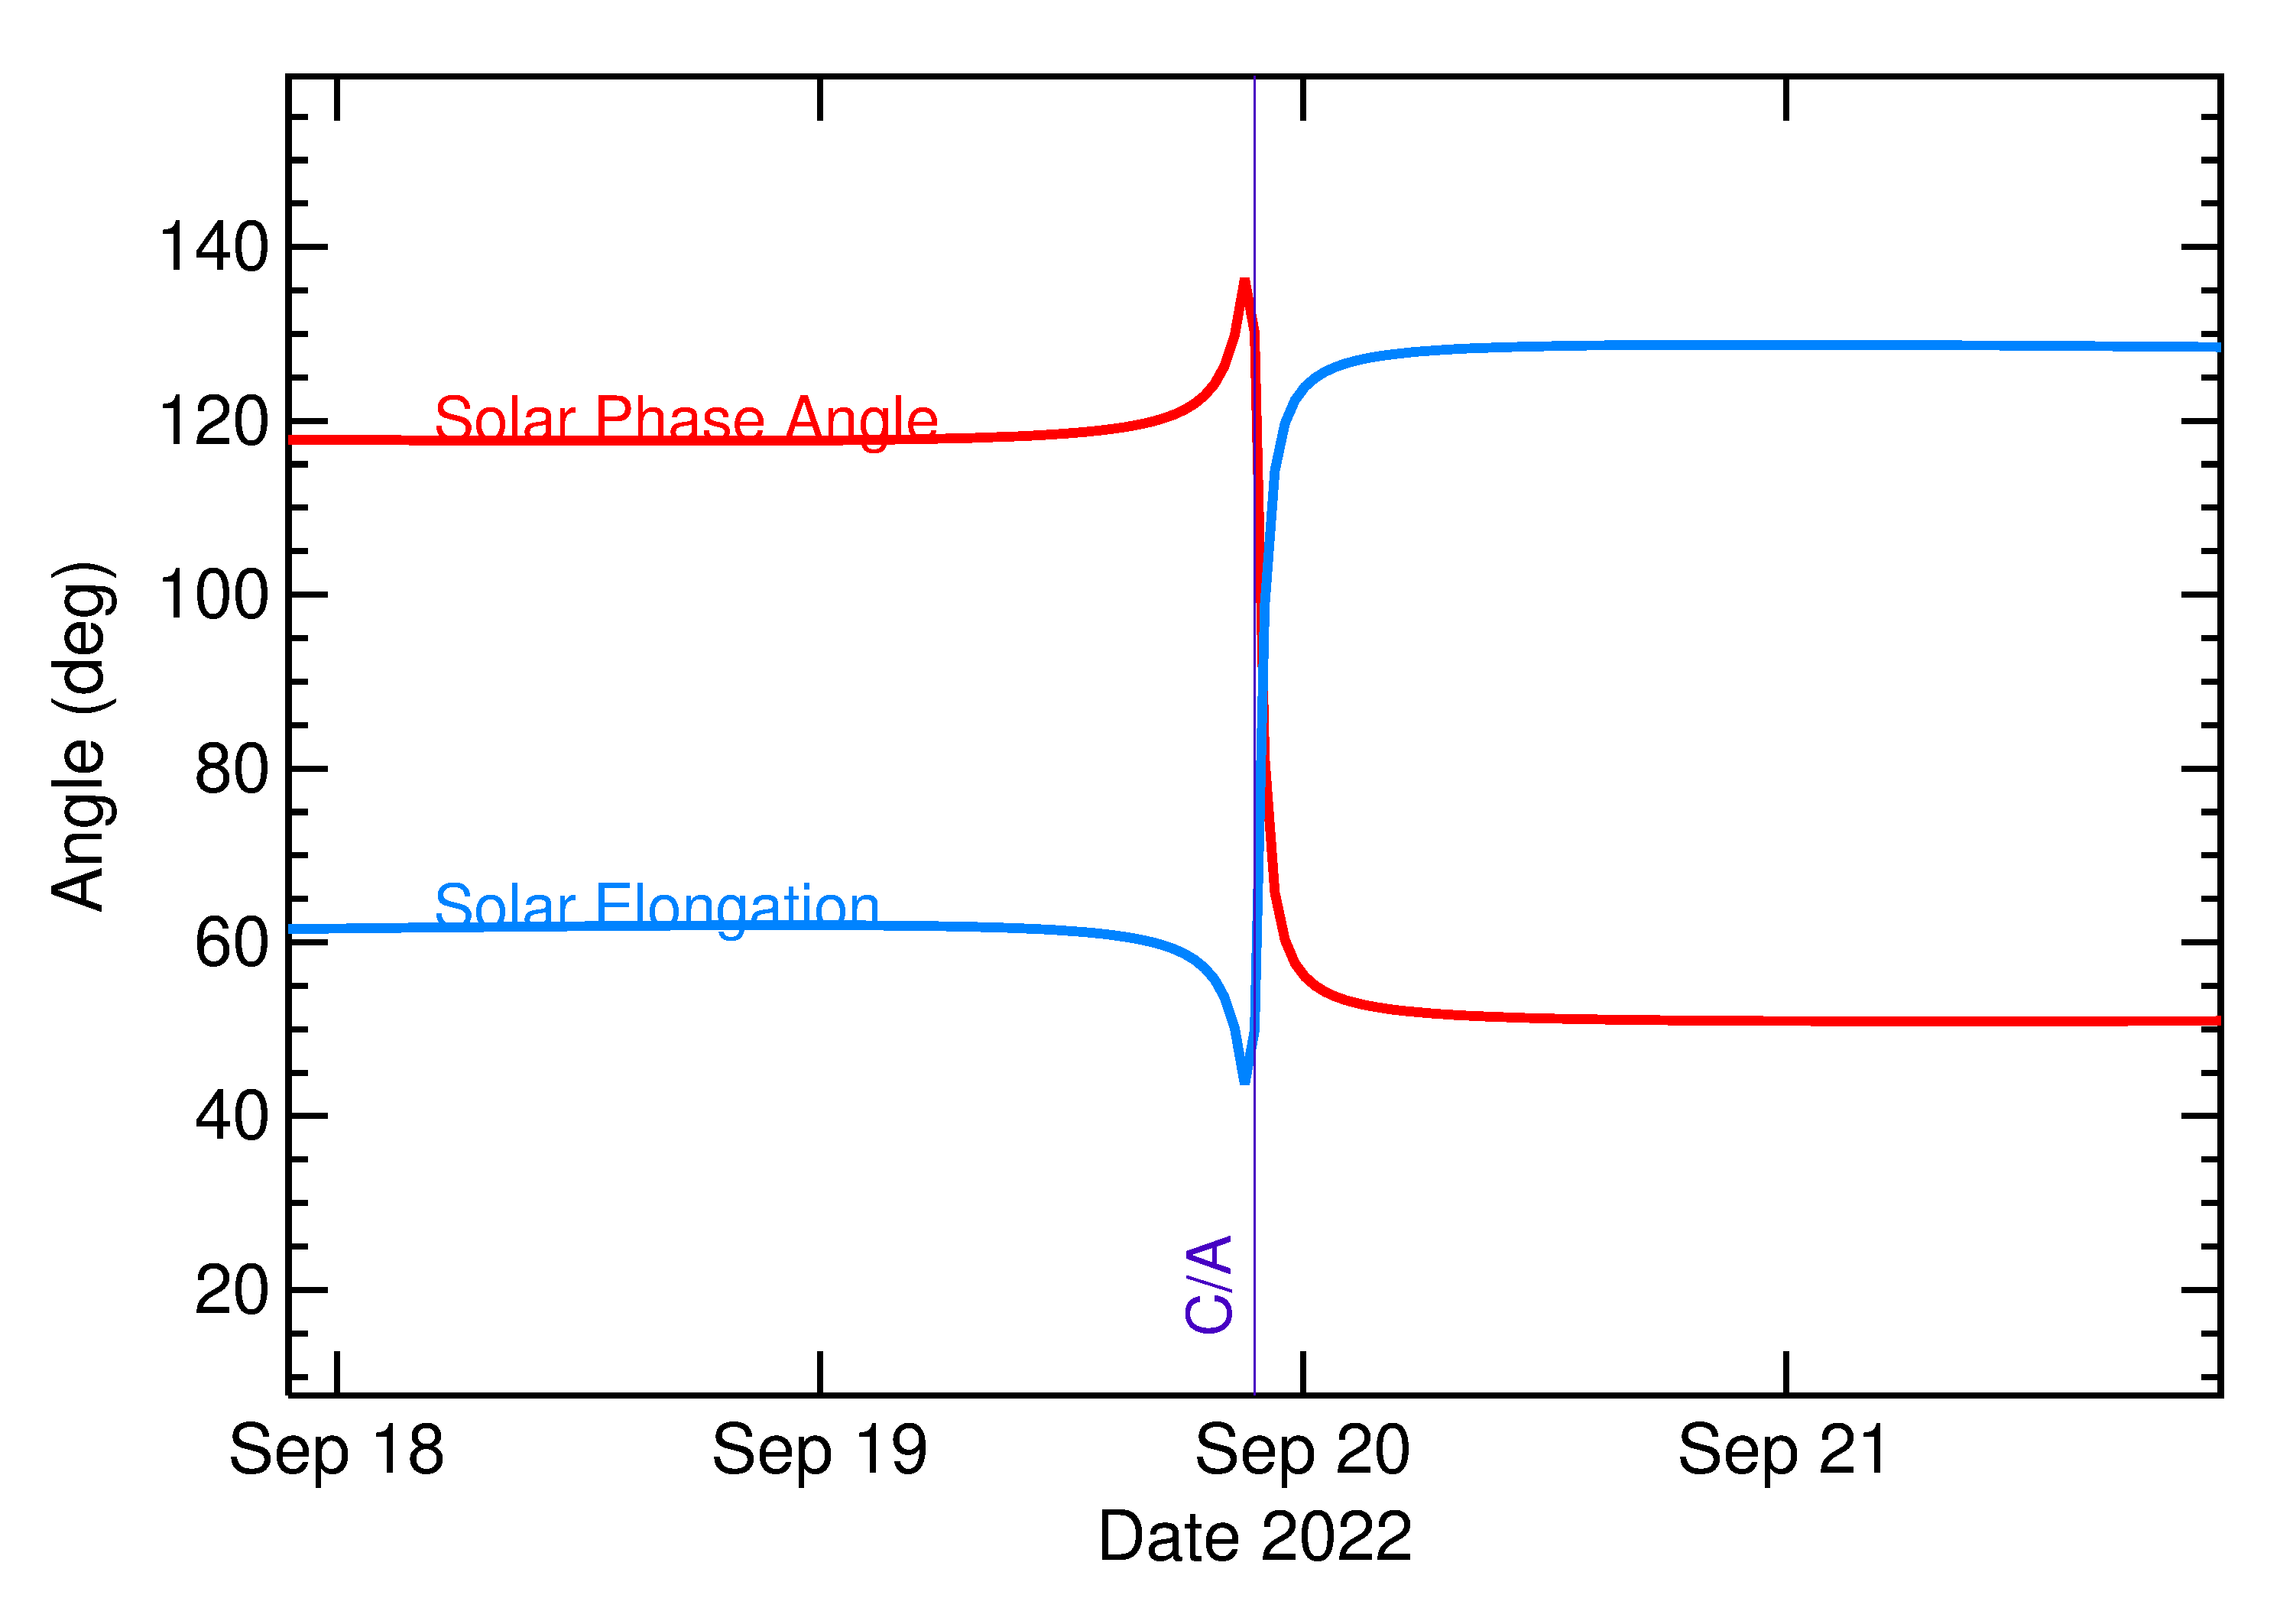 Solar Elongation and Solar Phase Angle of 2022 SK4 in the days around closest approach